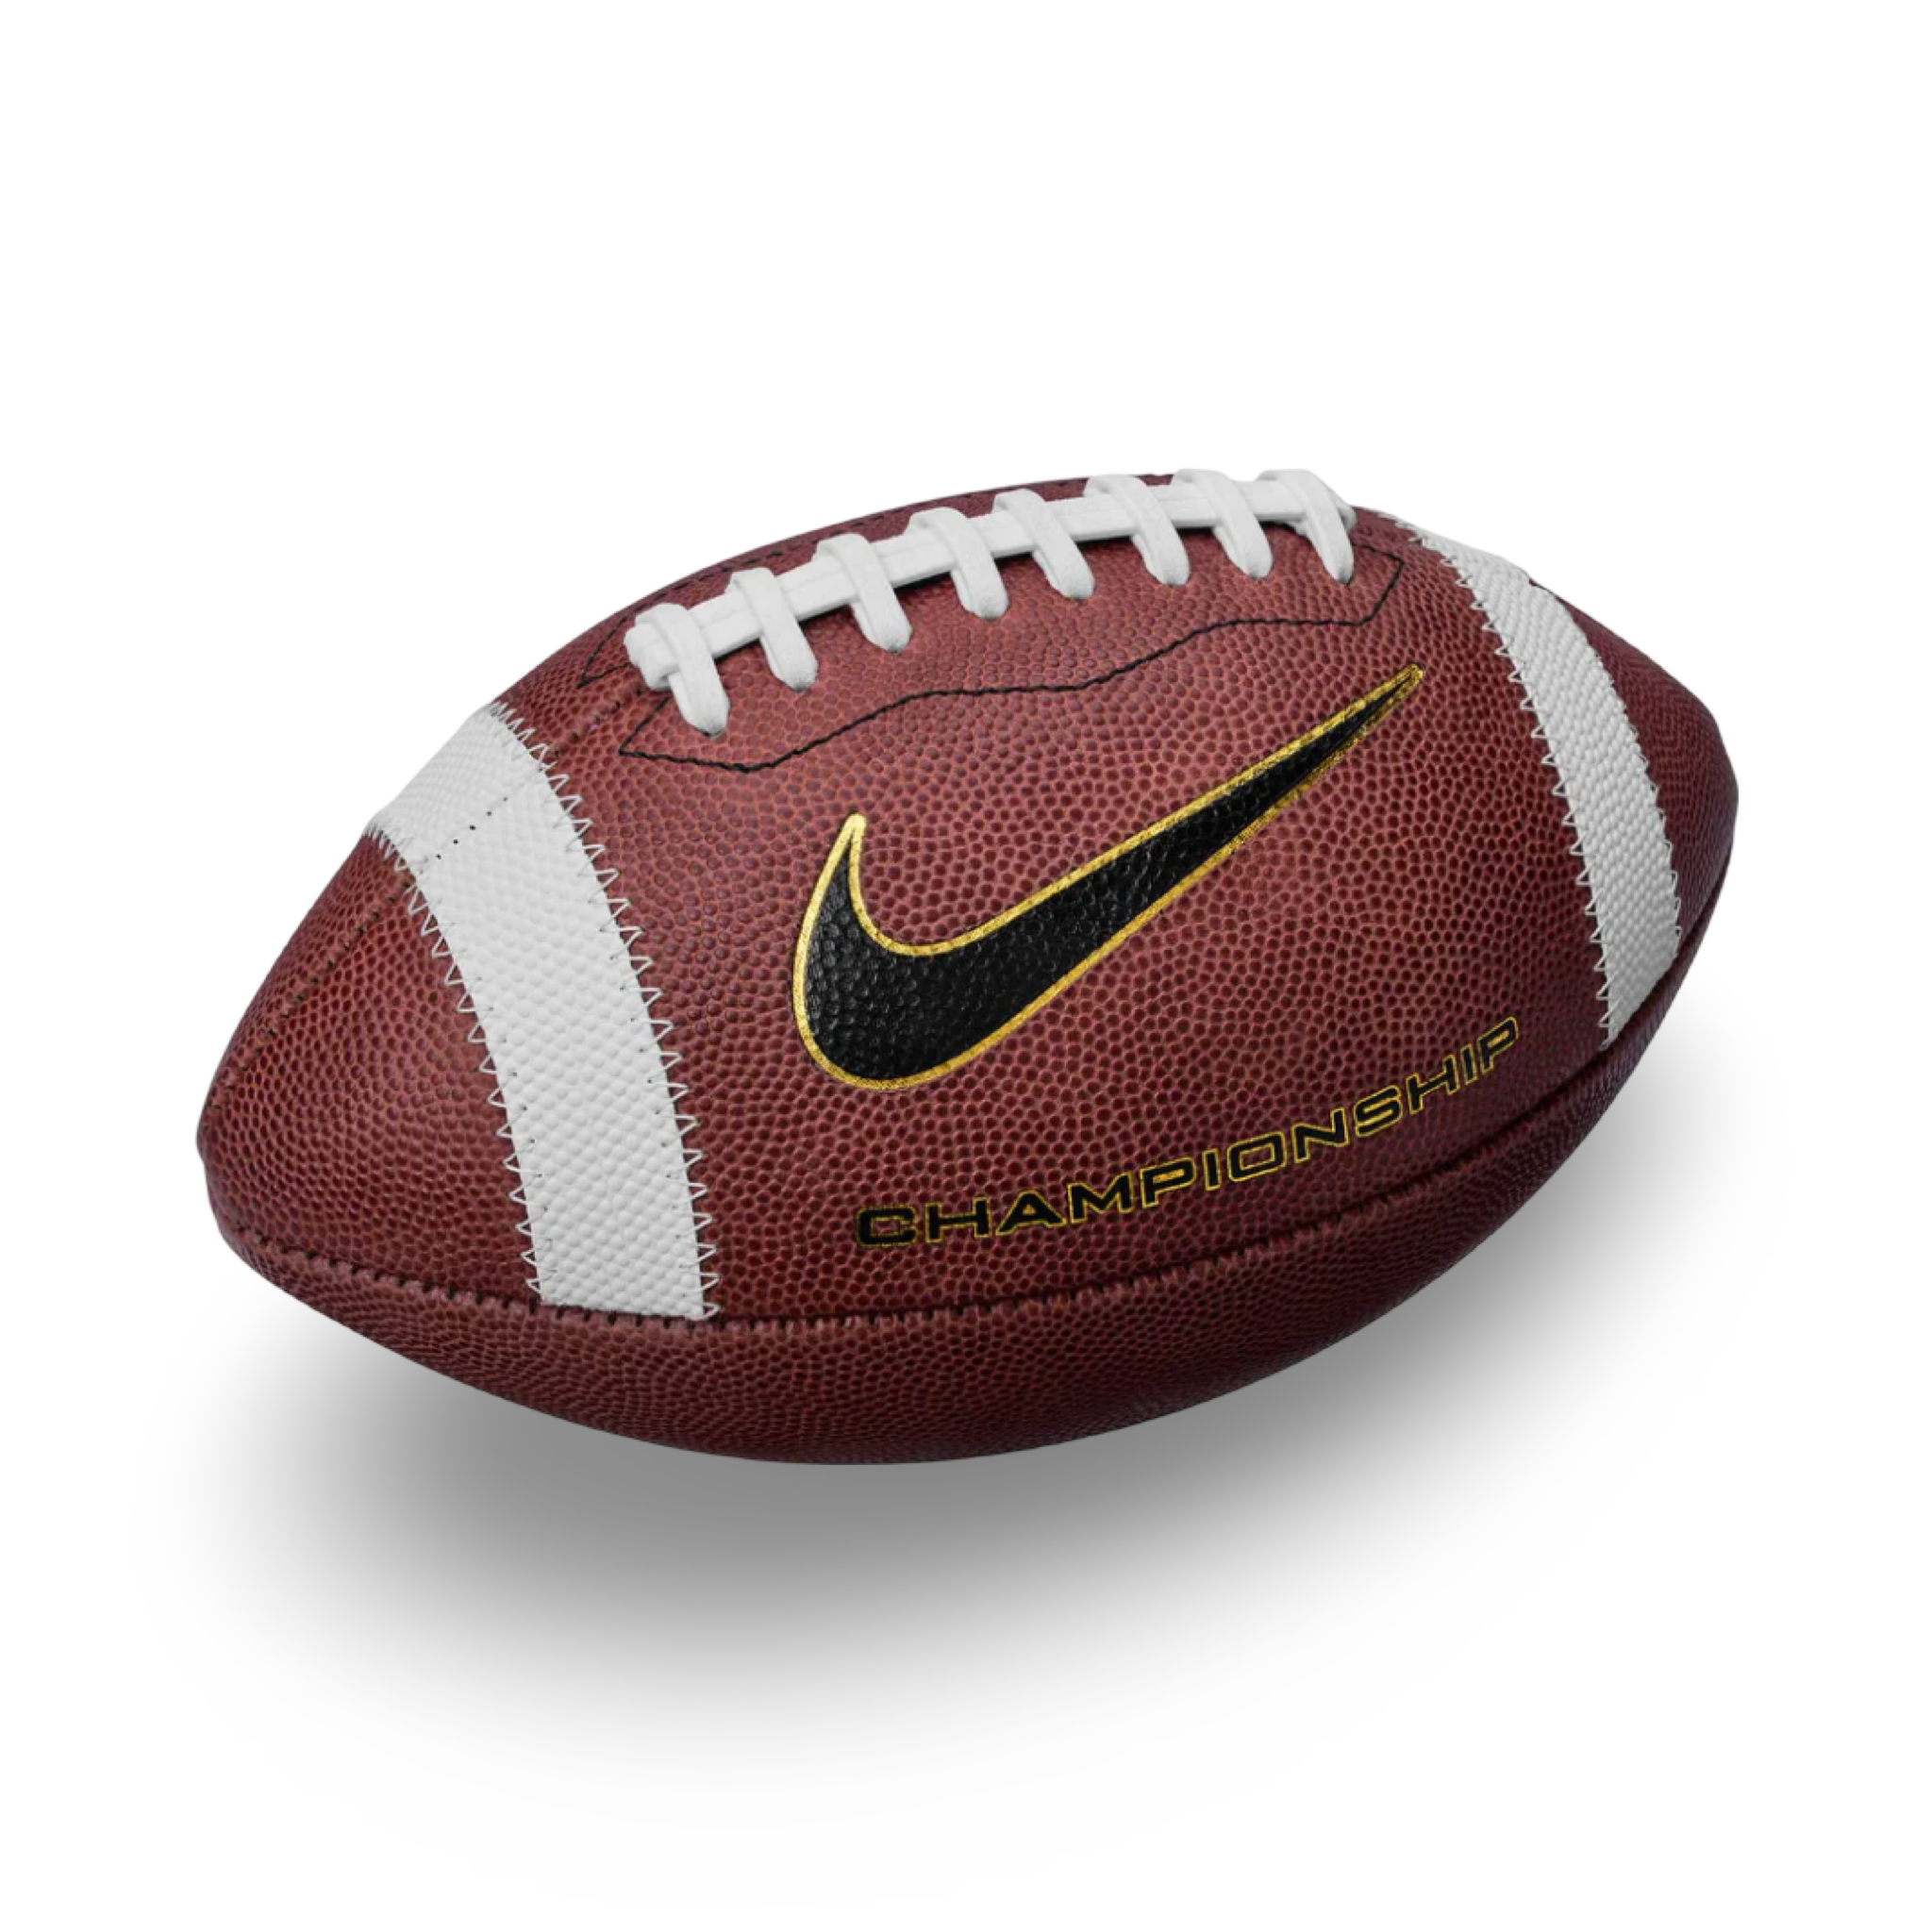 Nike Championship Leather Football - Youth